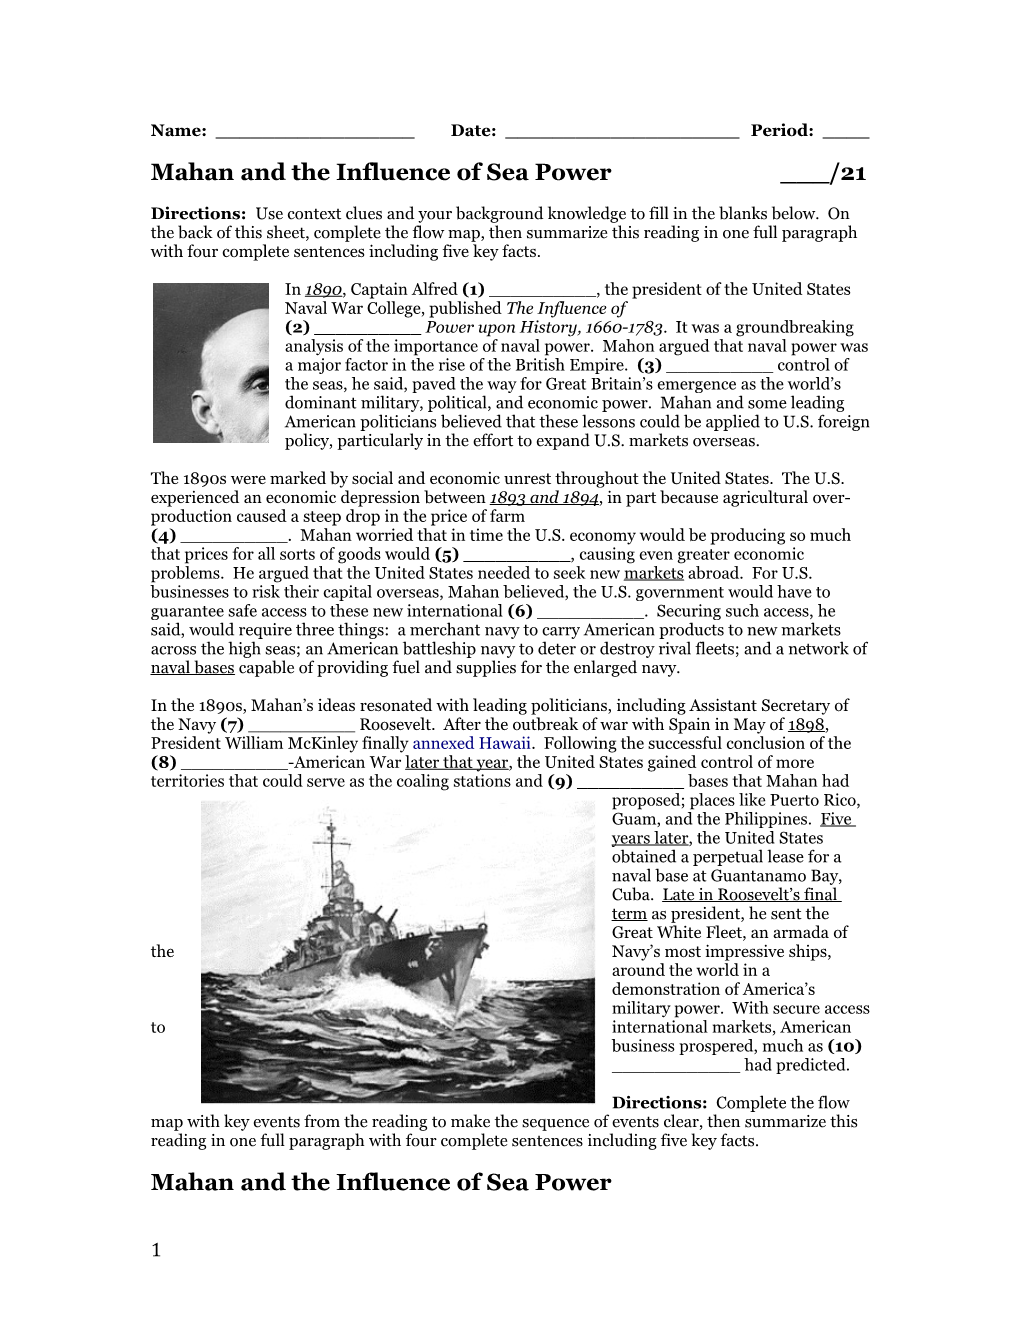 Mahan and the Influence of Sea Power ___/21